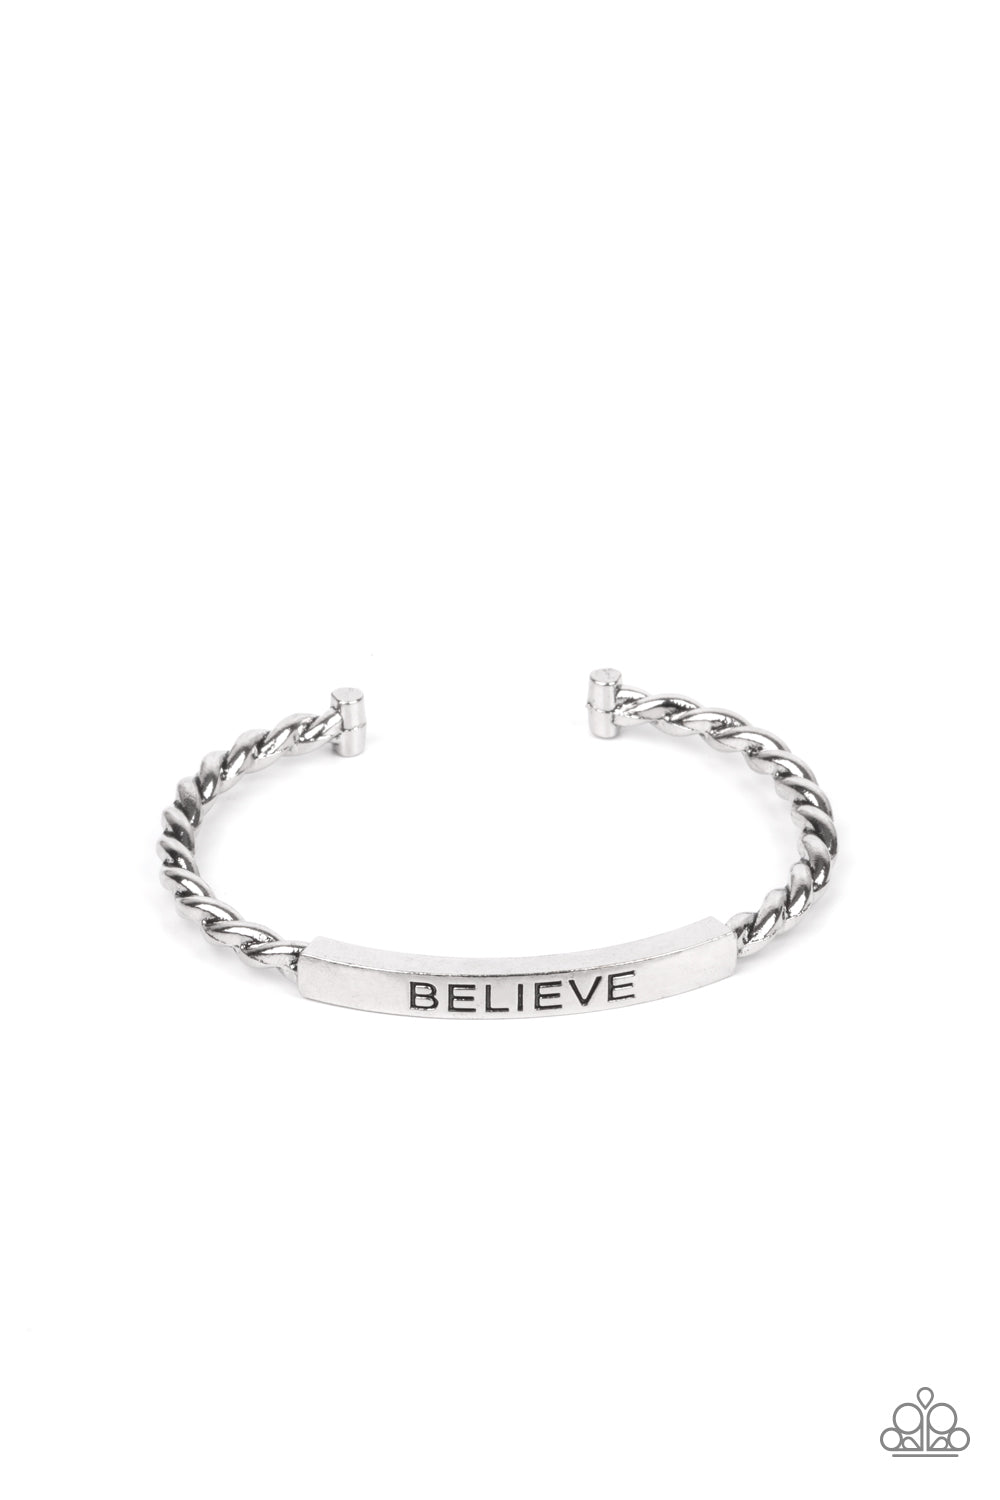 Keep Calm and Believe Silver Cuff Bracelet - Paparazzi Accessories  Twisted silver bars attach to a shiny silver plate stamped in the word, "BELIEVE," creating an inspiring cuff around the wrist.  Sold as one individual bracelet.